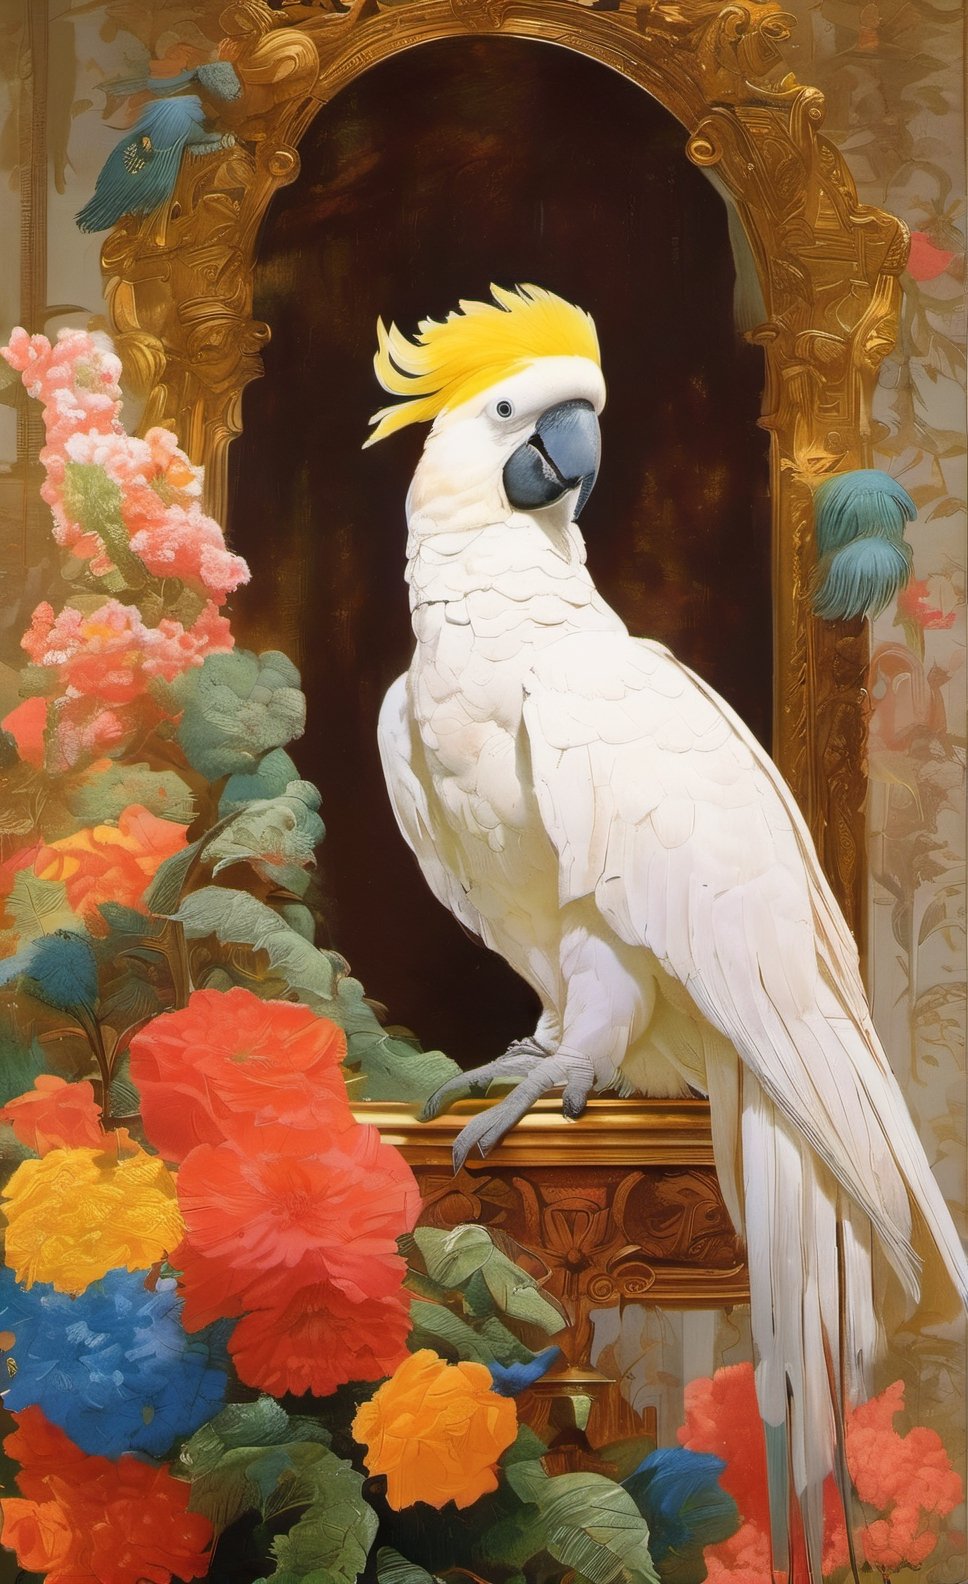 art by Masamune Shirow, art by J.C. Leyendecker, art by boris vallejo, a masterpiece, stunning beauty, hyper-realistic oil painting, vibrant colors, spanish women, 1950 art decor, 1950 art poster, black cockatoo, sulphur crested cockatoo, fashionistas, baroque style, art by armando huerta, art design by armando huertA,  tattoo by ed hardy, more detail XL,close up,Oil painting, 8k, highly detailed, Vogue style, a telephoto shot, 1000mm lens, f2,8,